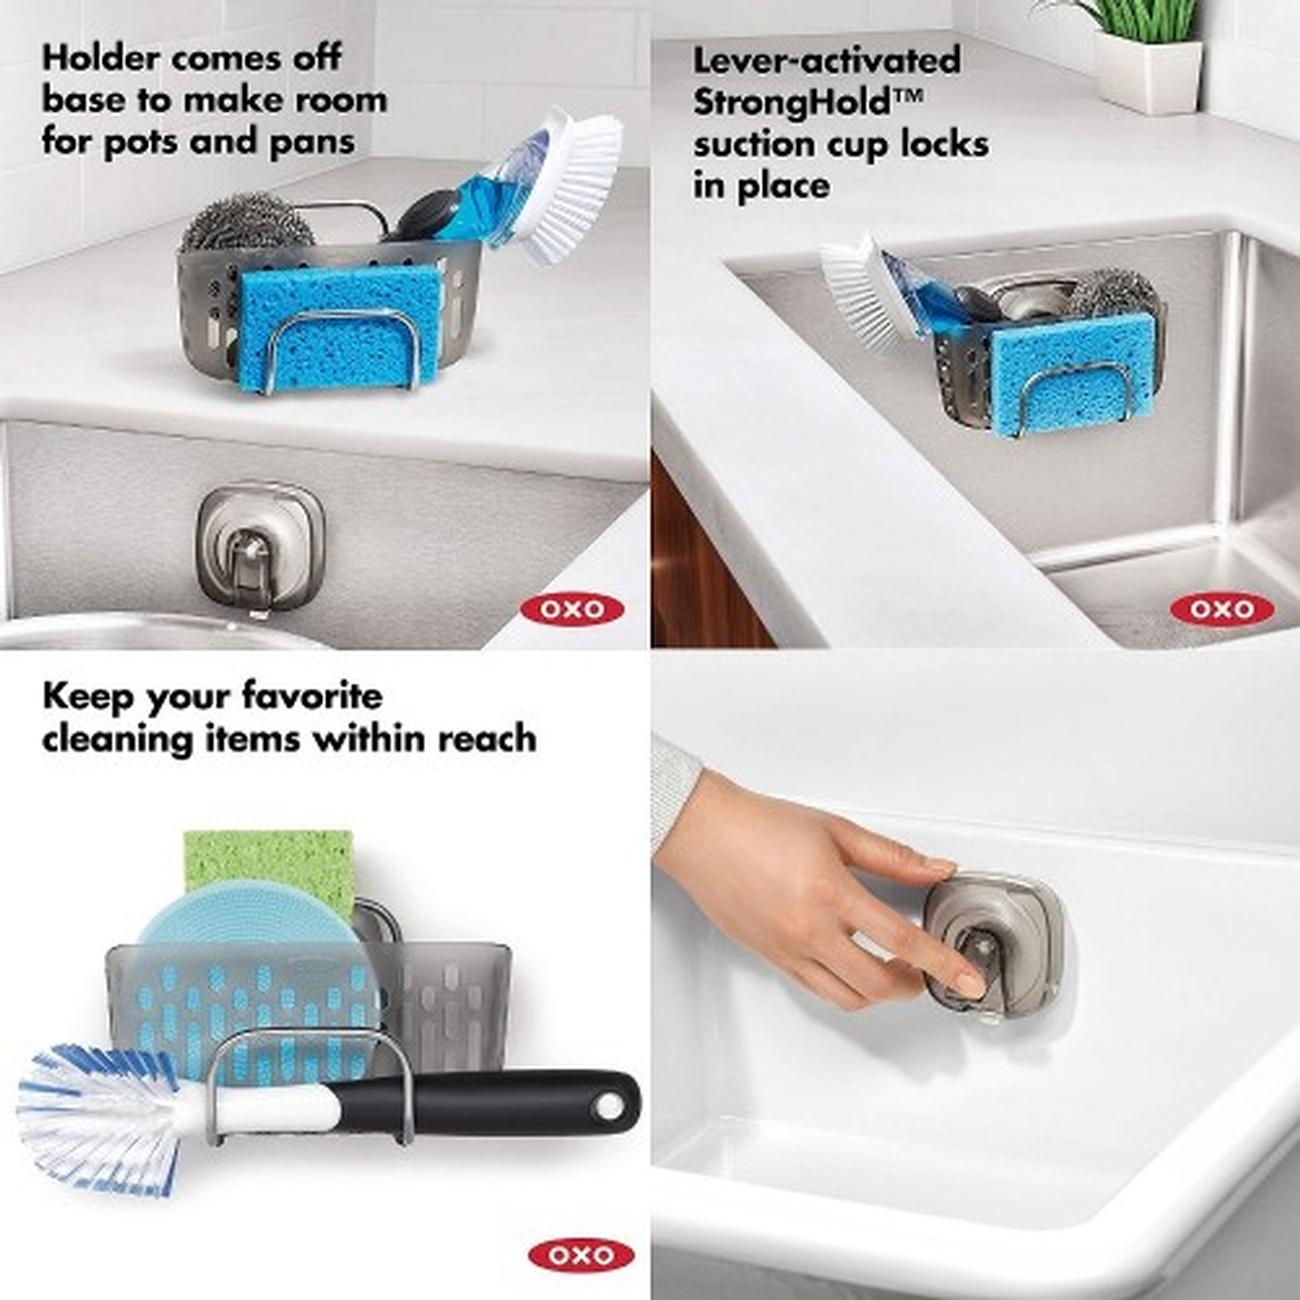 https://www.thekitchenwhisk.ie/contentfiles/productImages/Large/OXO-StrongHold-Sink-Organiser-Caddy-Good-Grips-how-to-use.jpg